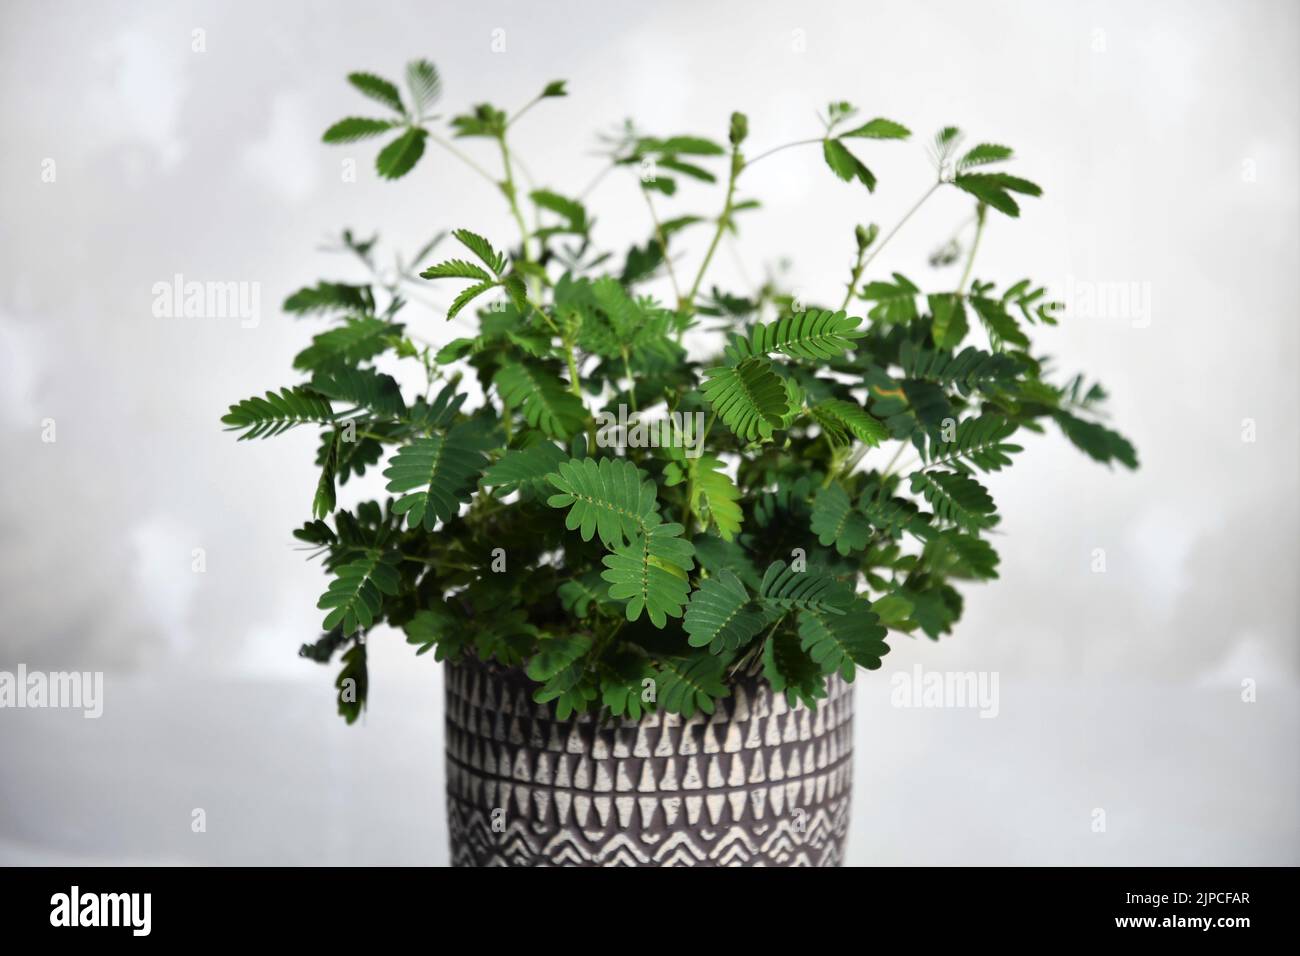 Mimosa pudica houseplant, aka sensitive plant, sleepy plant, action plant, touch-me-not, and shameplant. Isolated against a white background. Stock Photo